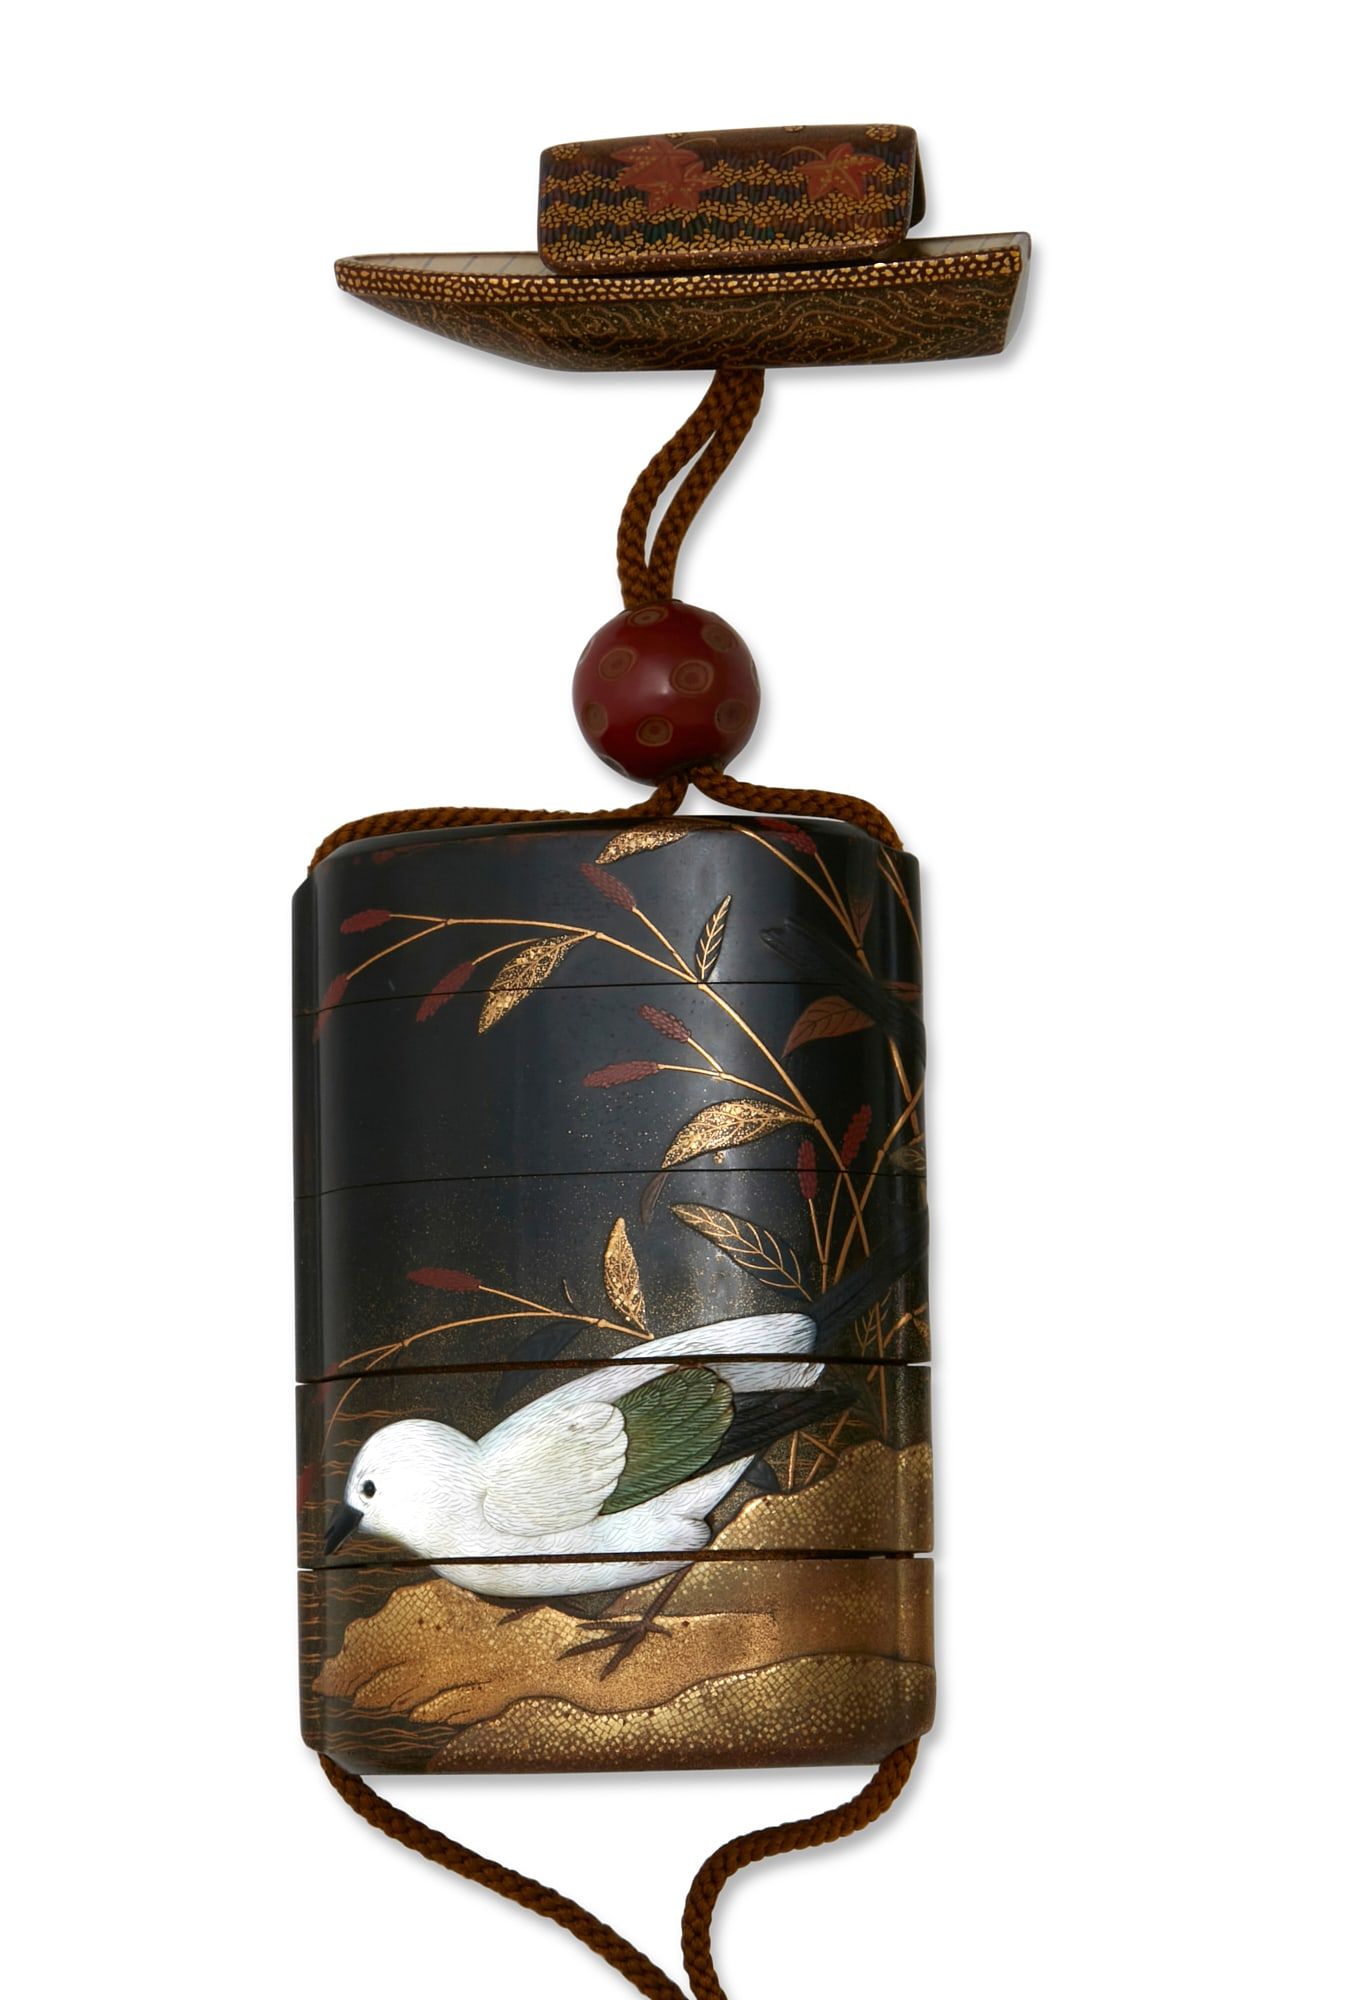 A JAPANESE INLAID LACQUERED INRO 2fb3b04